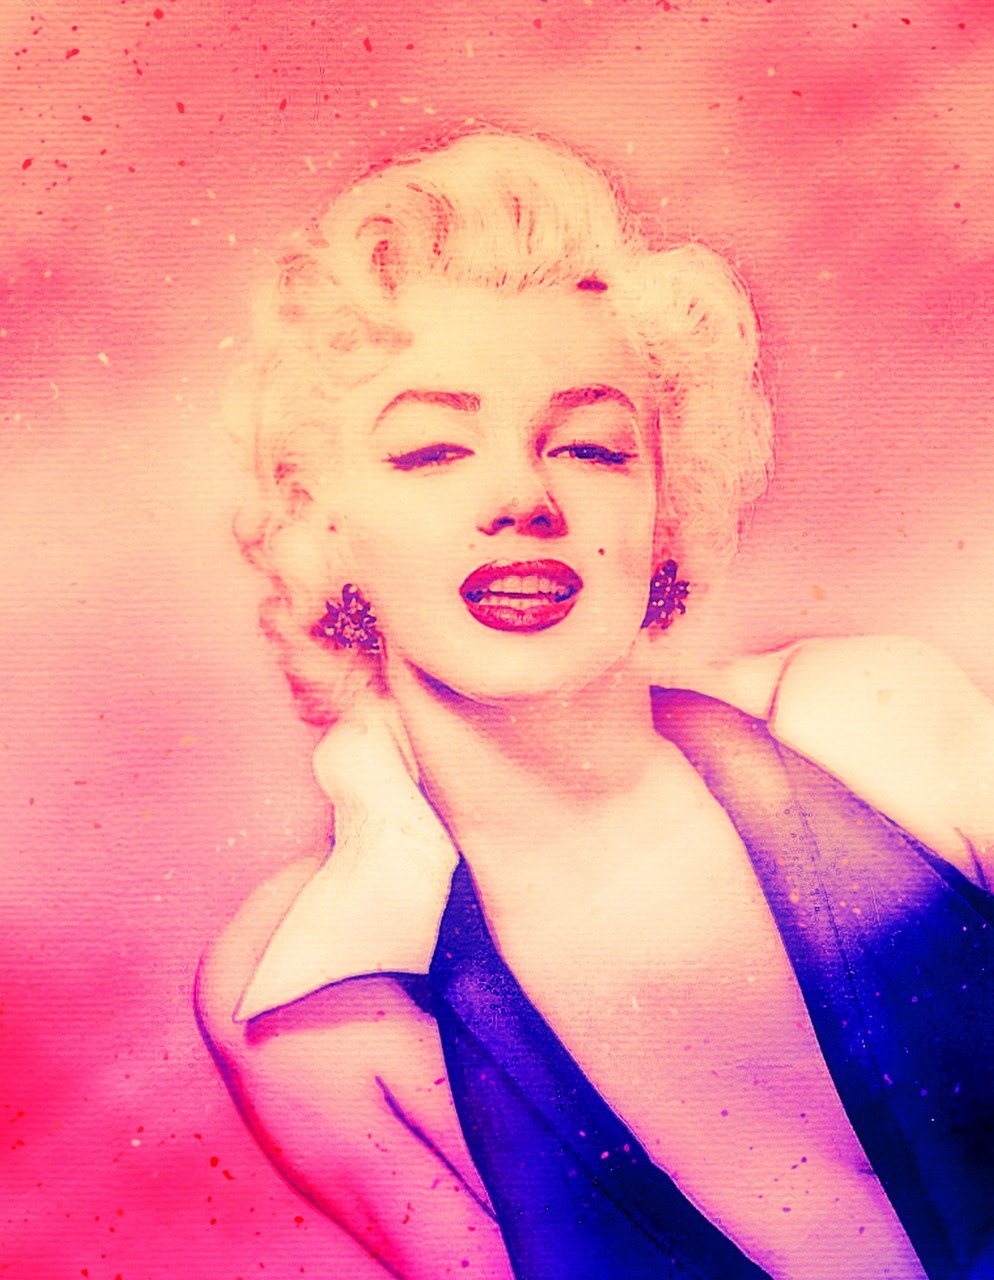 a painting of a woman with her eyes closed, a colorized photo, inspired by Marilyn Bendell, tumblr, duotone!, retro effect, magenta, very famous photo